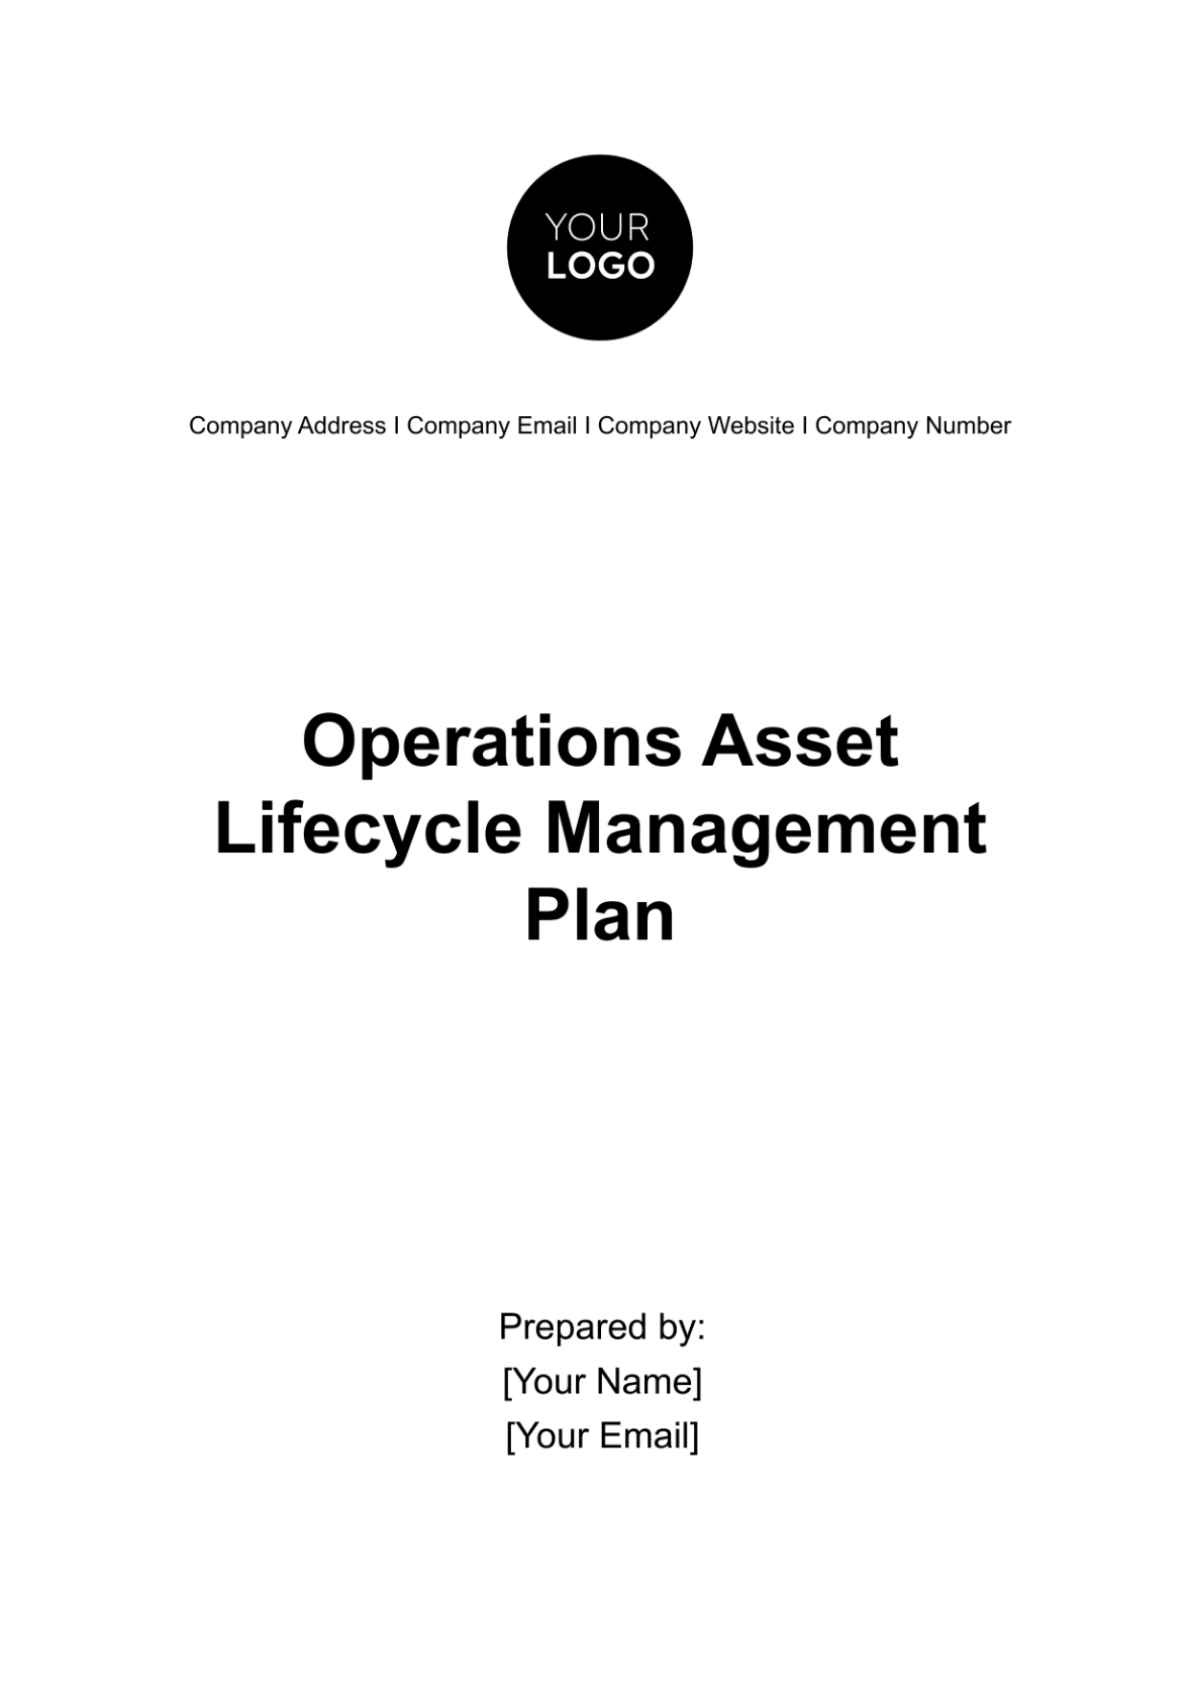 Operations Asset Lifecycle Management Plan Template